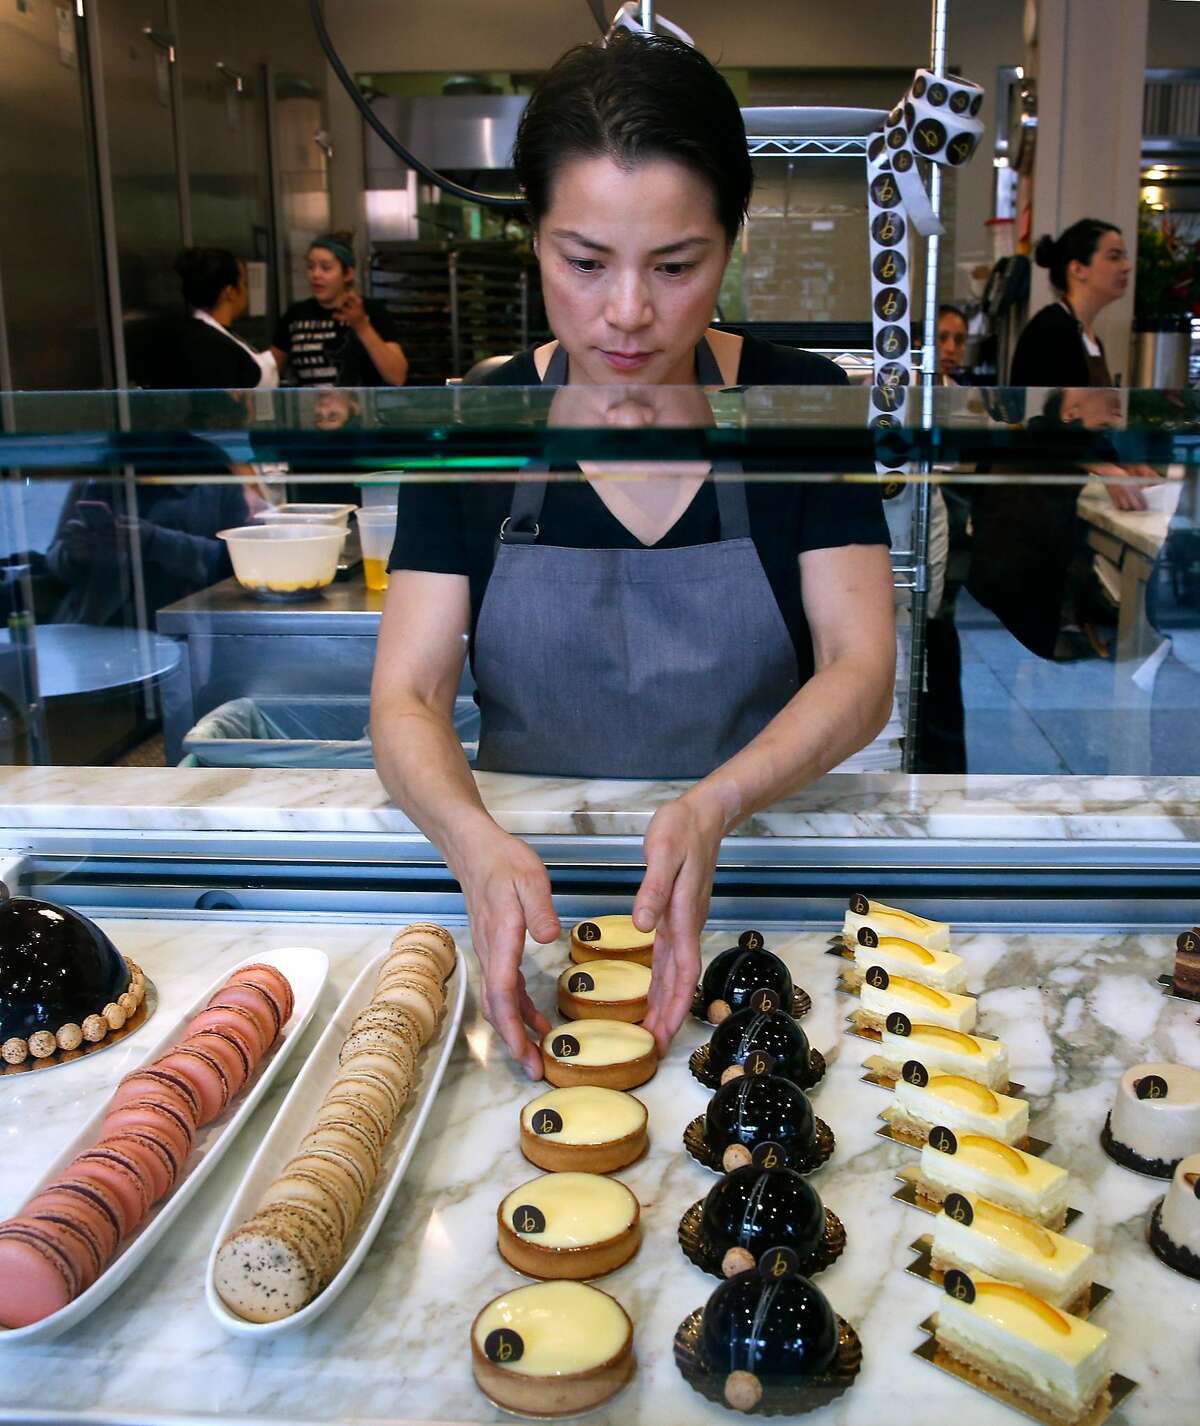 Co-owner Belinda Leong arranges pastries in a display case at b. Patisserie on California Street in San Francisco, Calif. on Saturday, March 10, 2018. Owners of the popular bakery are opening a shop in Seoul, South Korea next month.